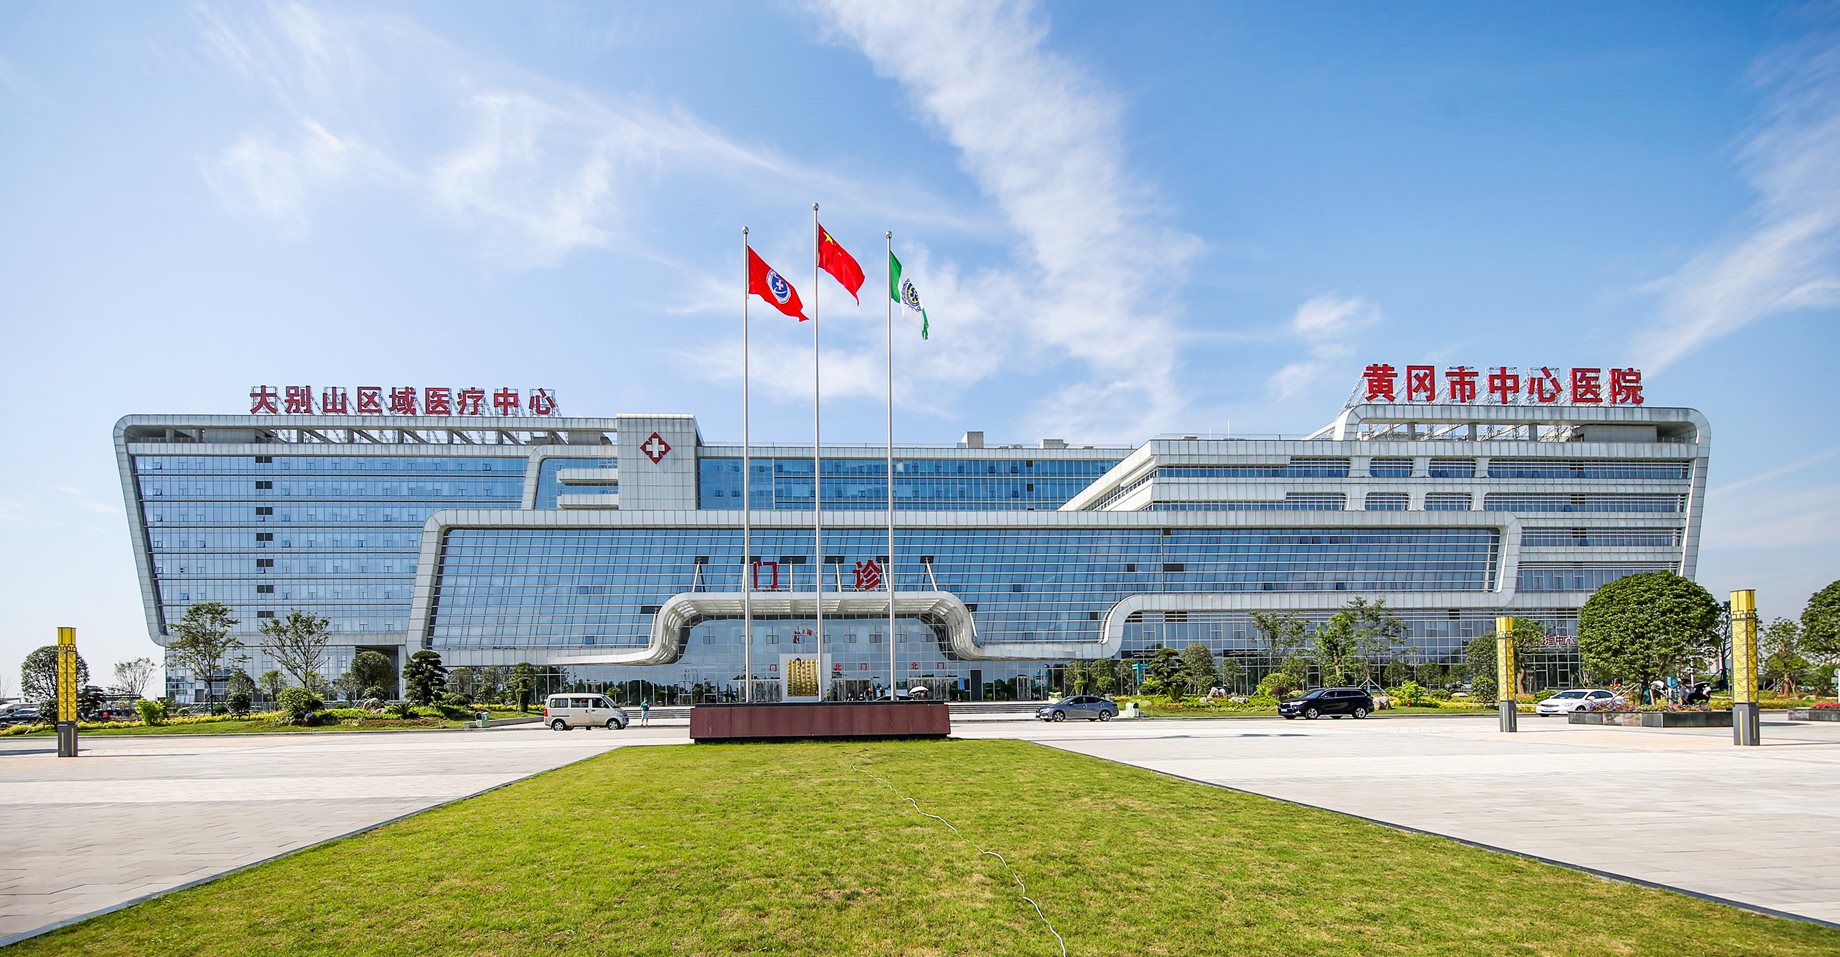 Huanggang Central Hospital Energy Cost Trusteeship Service Project: Through a “one-stop” energy management solution, the project can help reduce the investment of the hospital and optimise the energy supply system, greatly improving energy management efficiency.